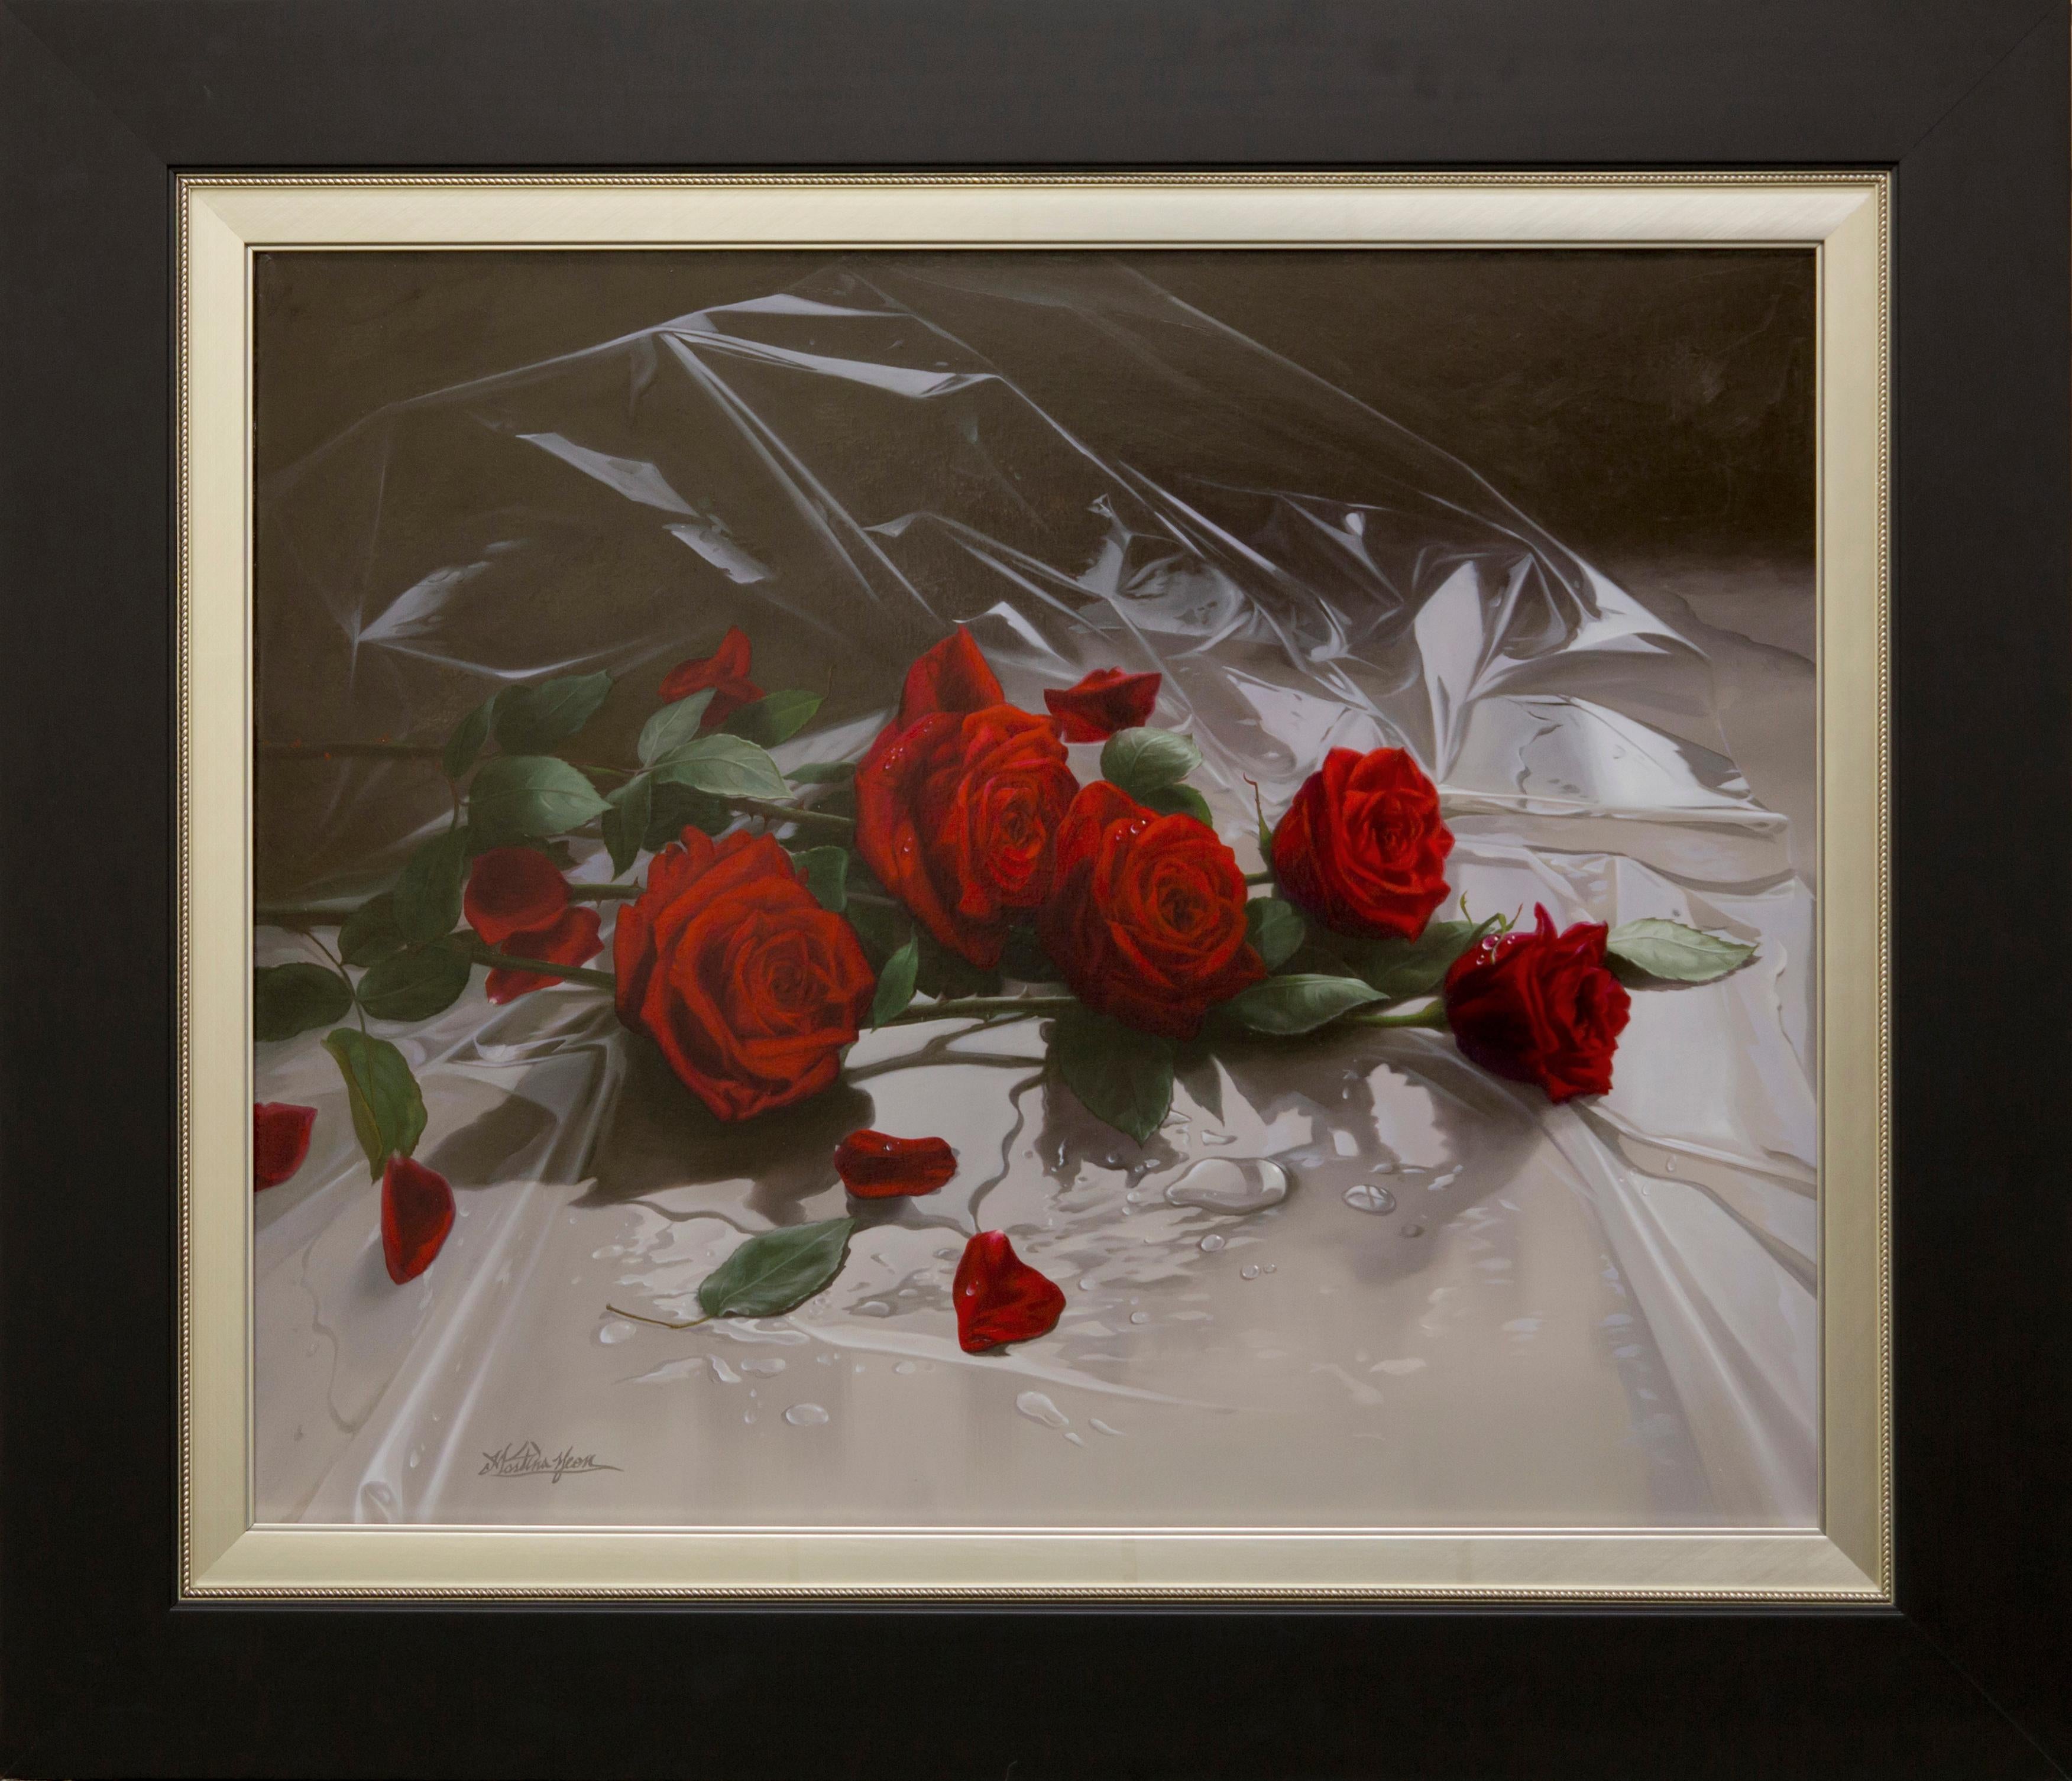 Item is in excellent condition and has only been displayed in a gallery setting. Item includes frame; framed dimensions are approximately 33 x 38 inches.

Martina Yeon, born in 1962, has lived in her adopted country Spain since 1991.  Starting to